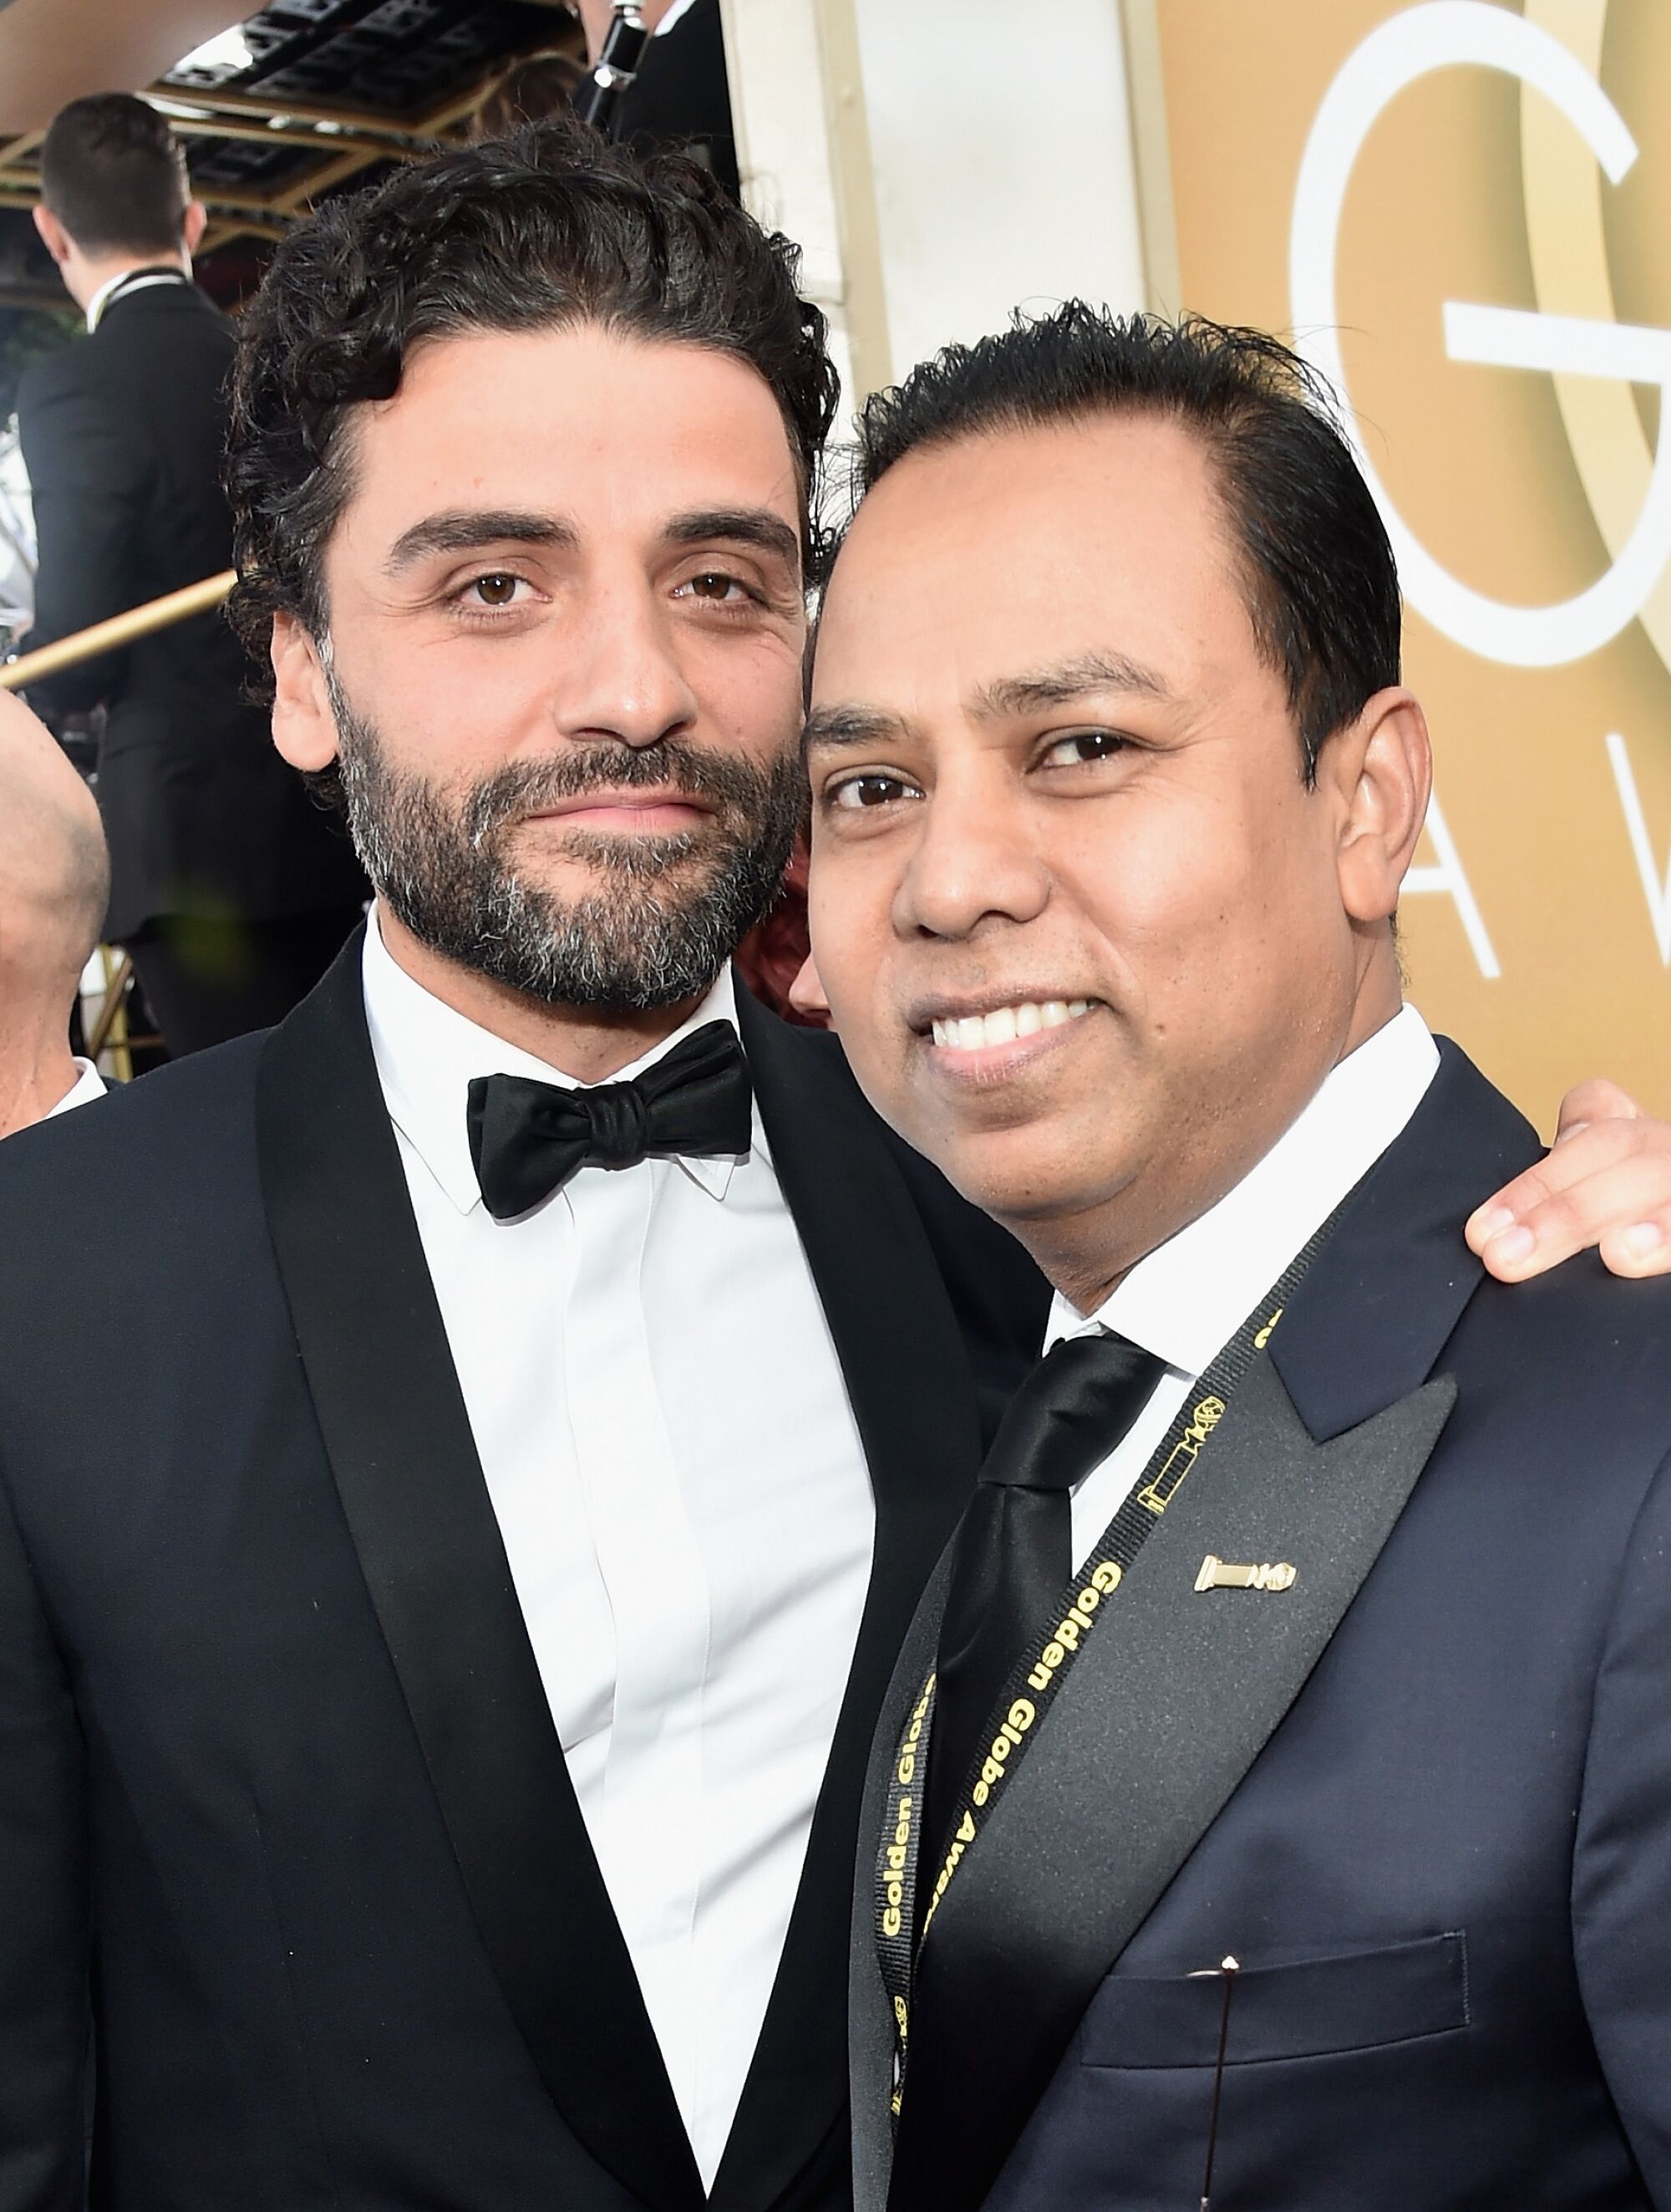 Actor Oscar Isaac and HFPA's Munawar Hosain pose for a photo at the Golden Globes red carpet